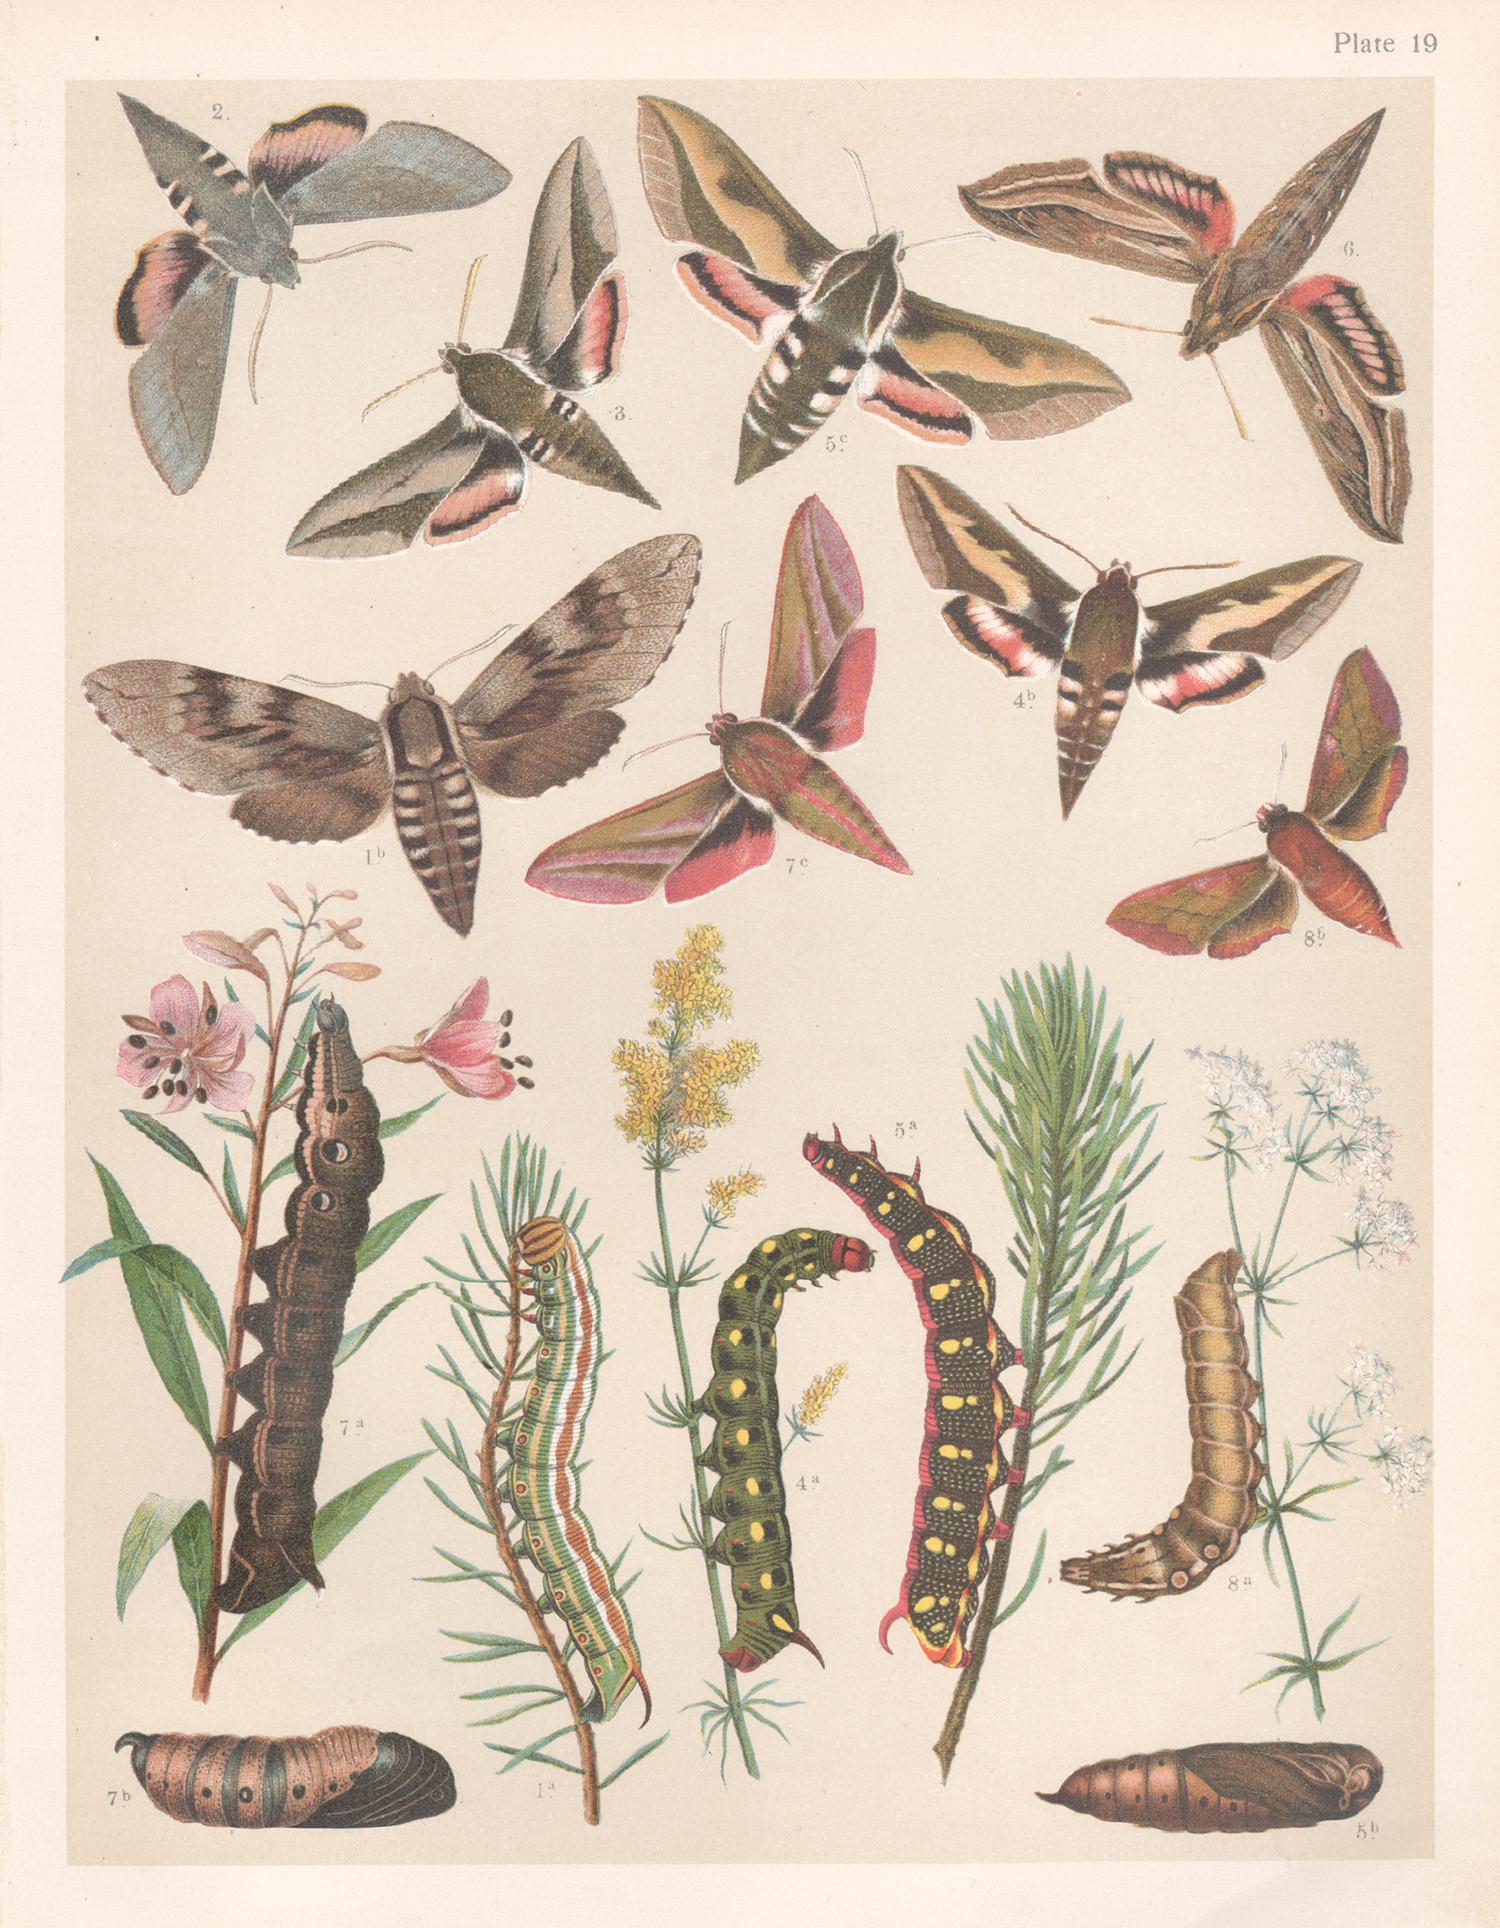 Antique 19th Century Insect Print Butterflies Recently Mounted 9 x 11 Chromolithograph